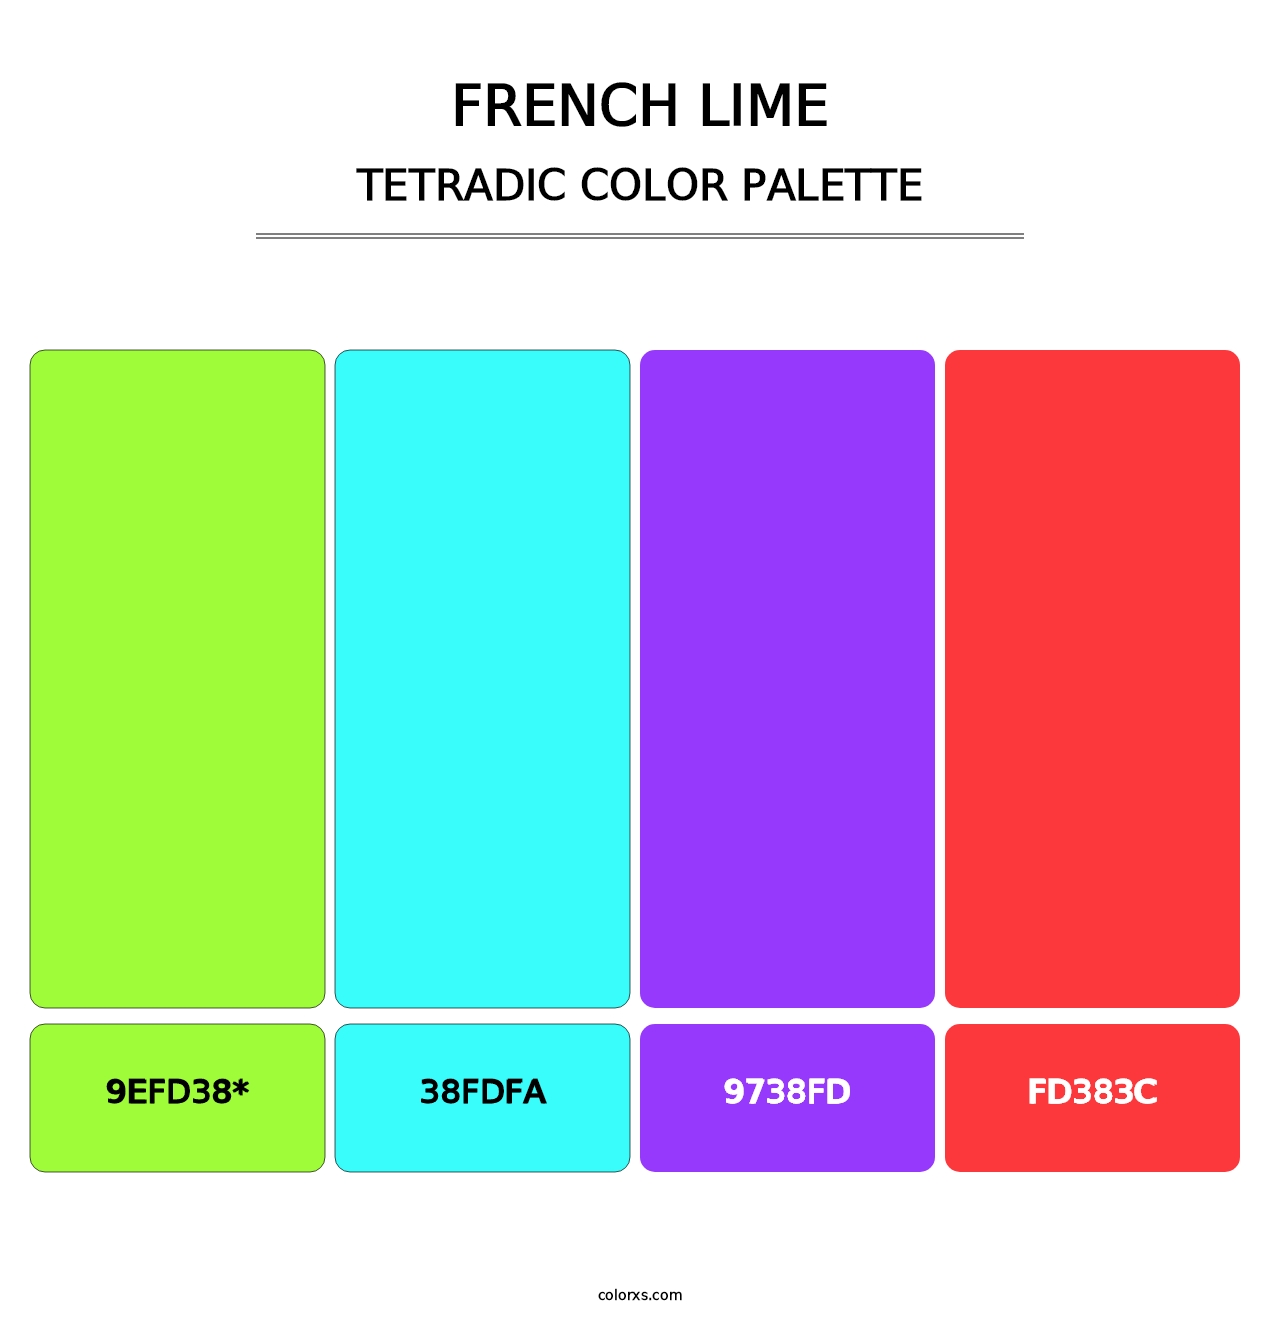 French Lime - Tetradic Color Palette